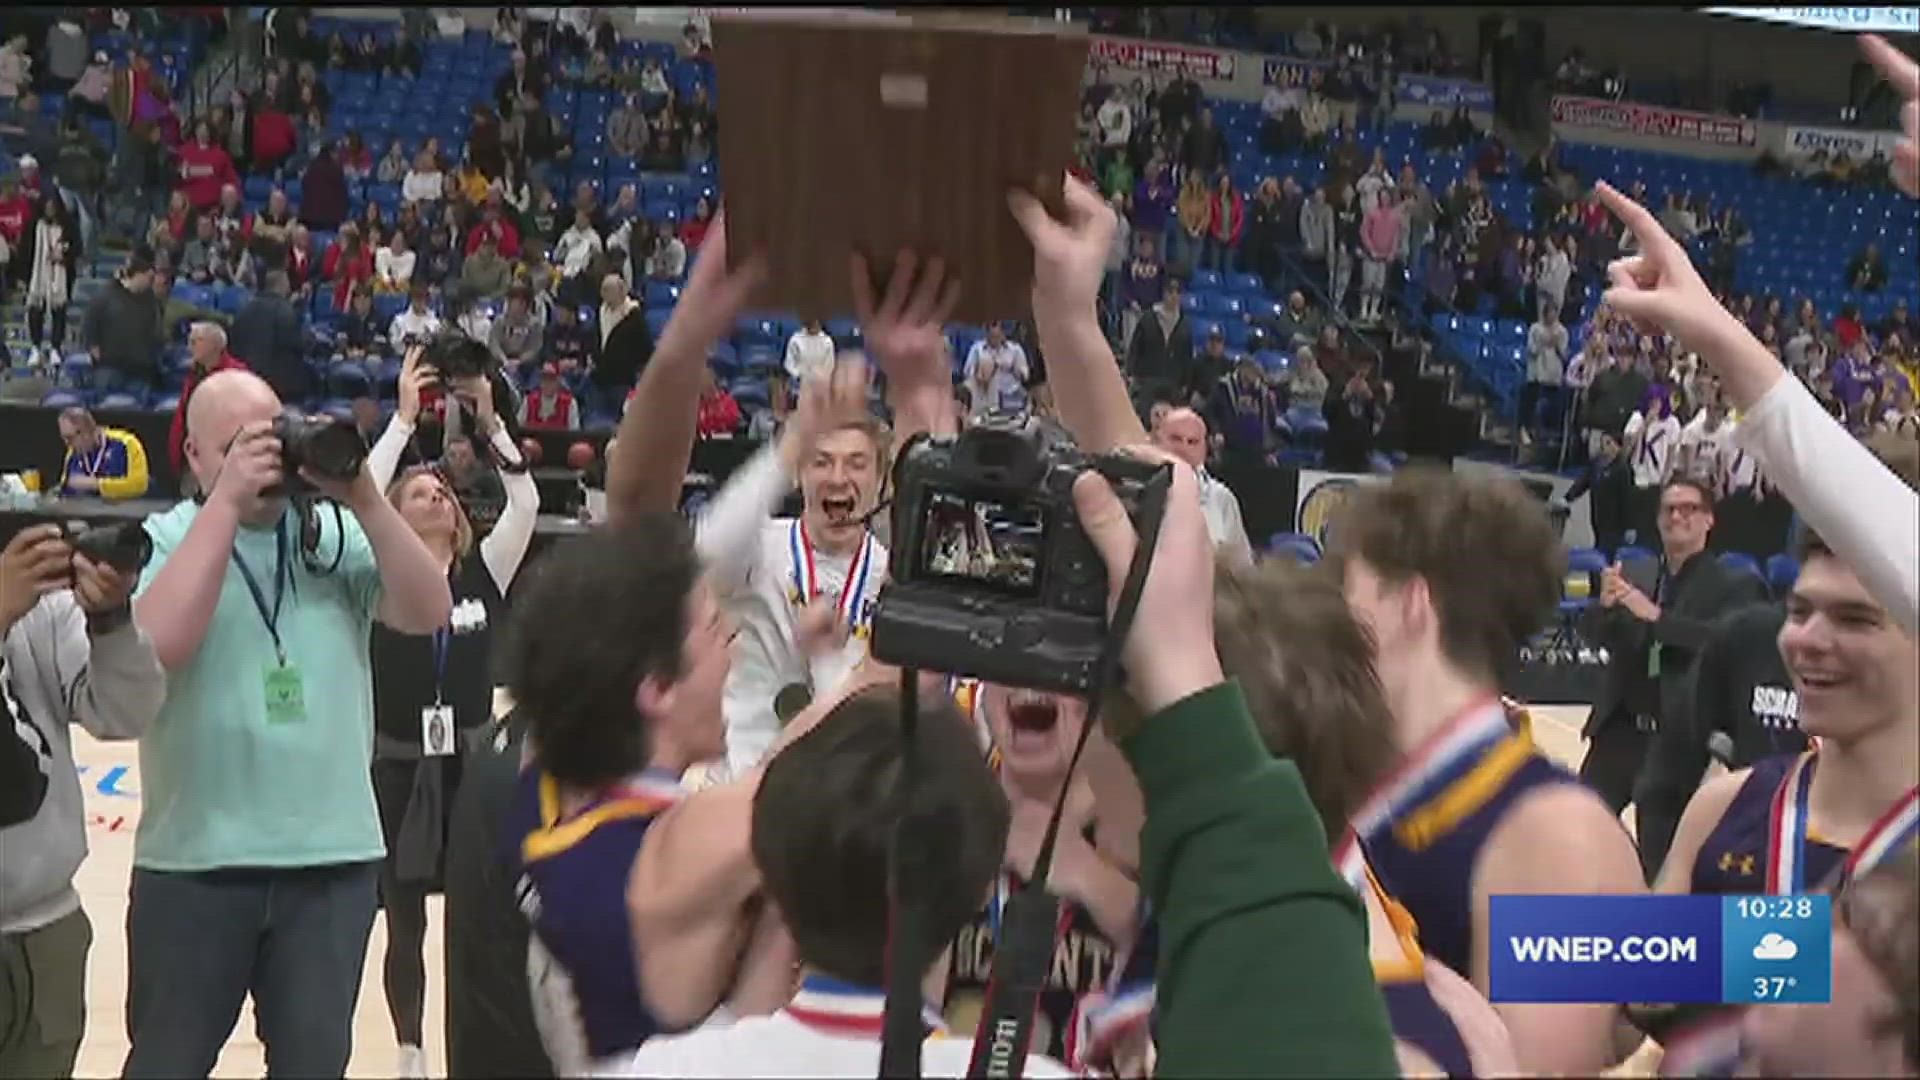 Scranton Prep defeats Valley View in a wild 51-43 game to advance to state playoffs.